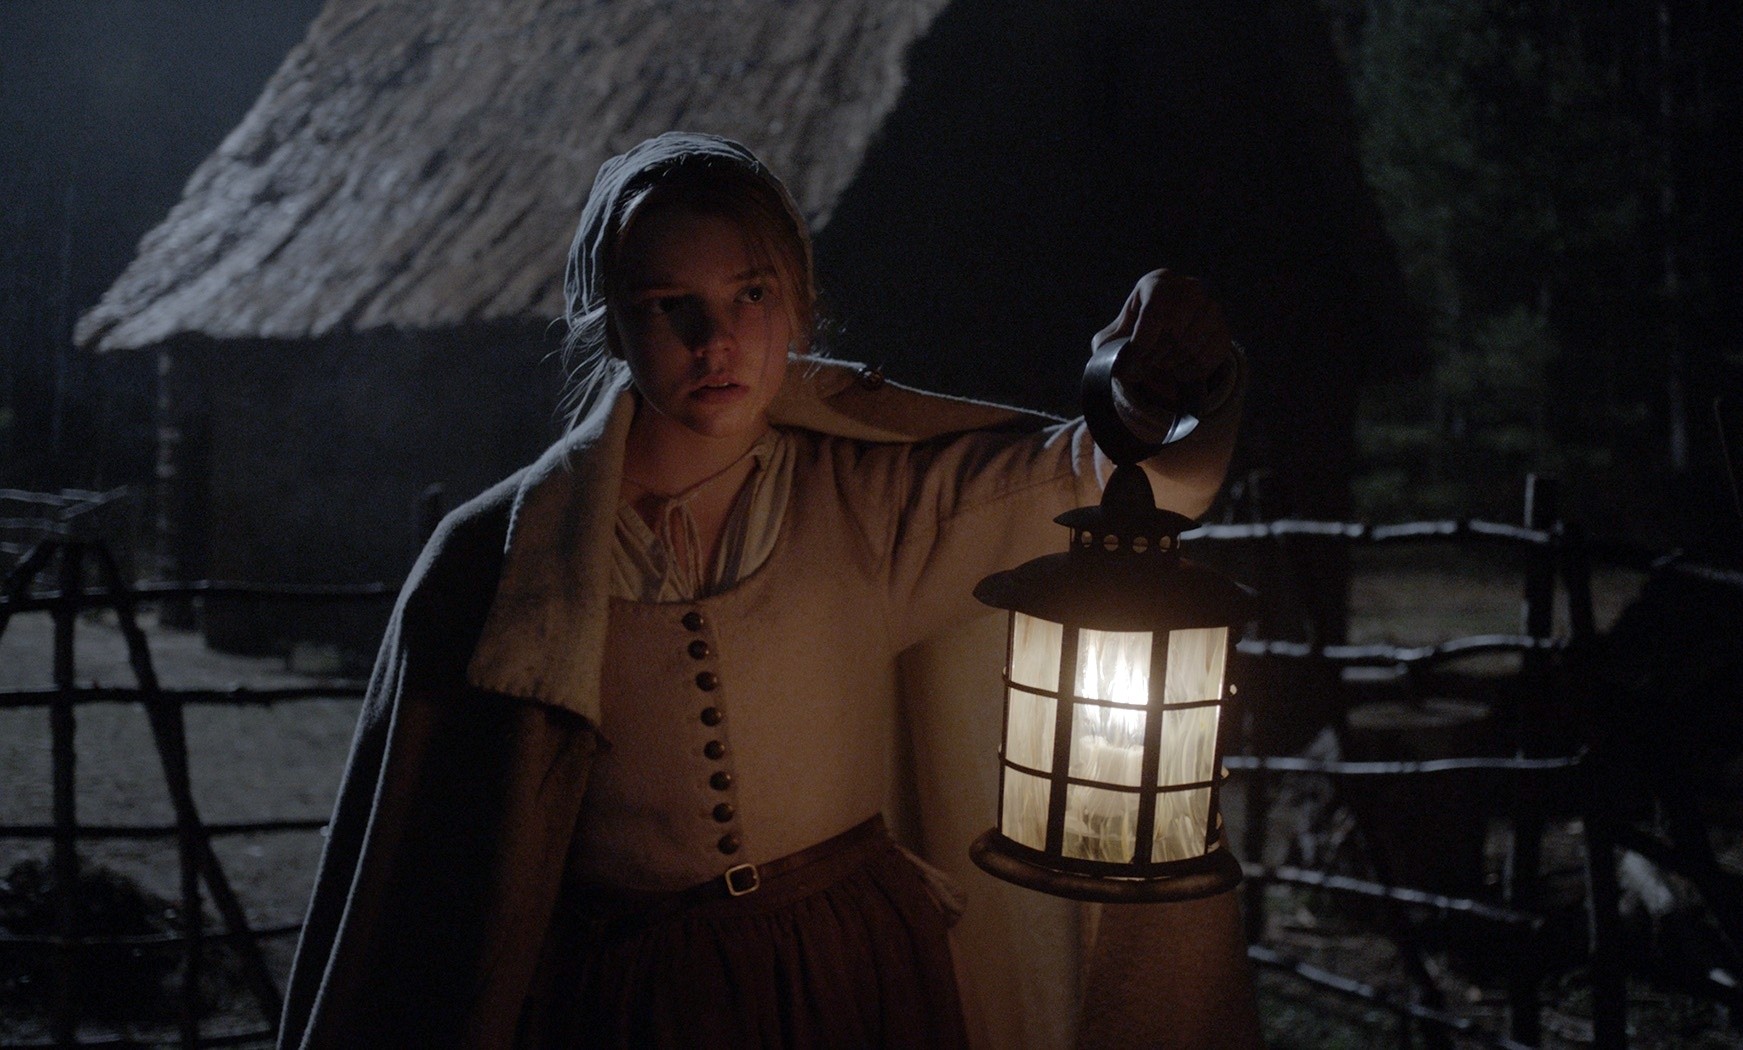 THE WITCH Is Unusual, But May Cast an Eerie Spell On You